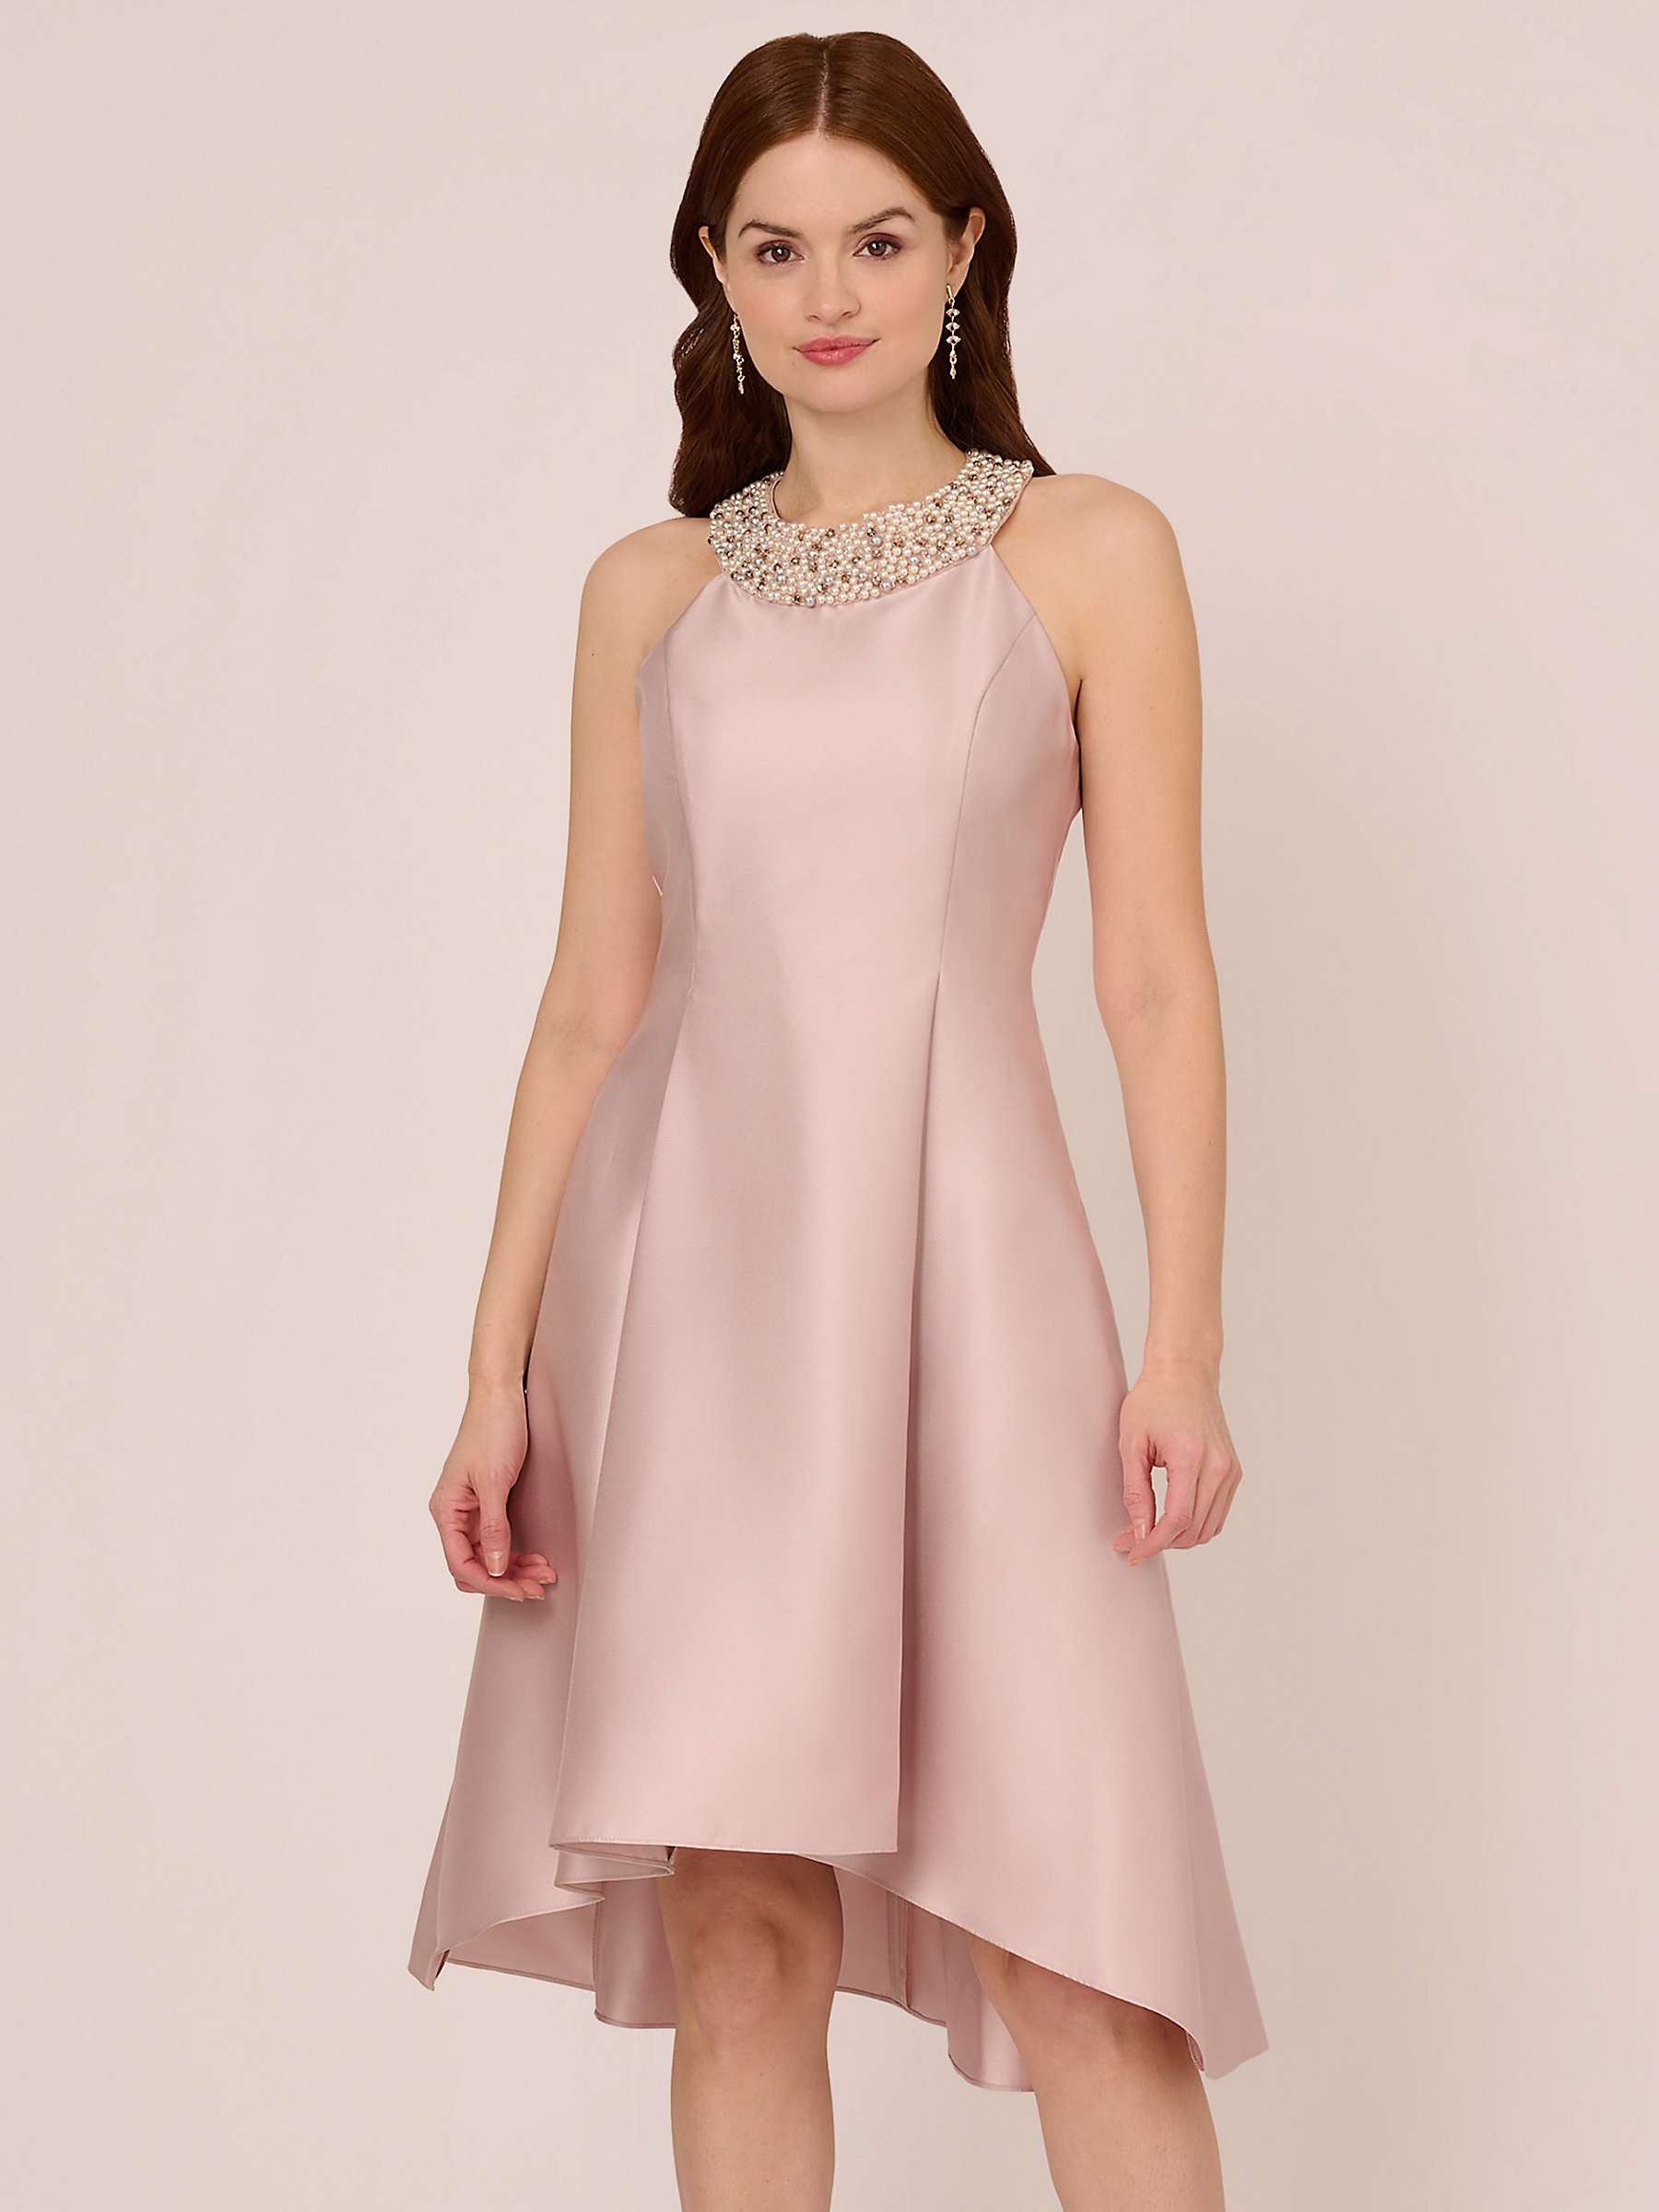 Buy Adrianna Papell Embellished Mikado Dress, Bellini Online at johnlewis.com